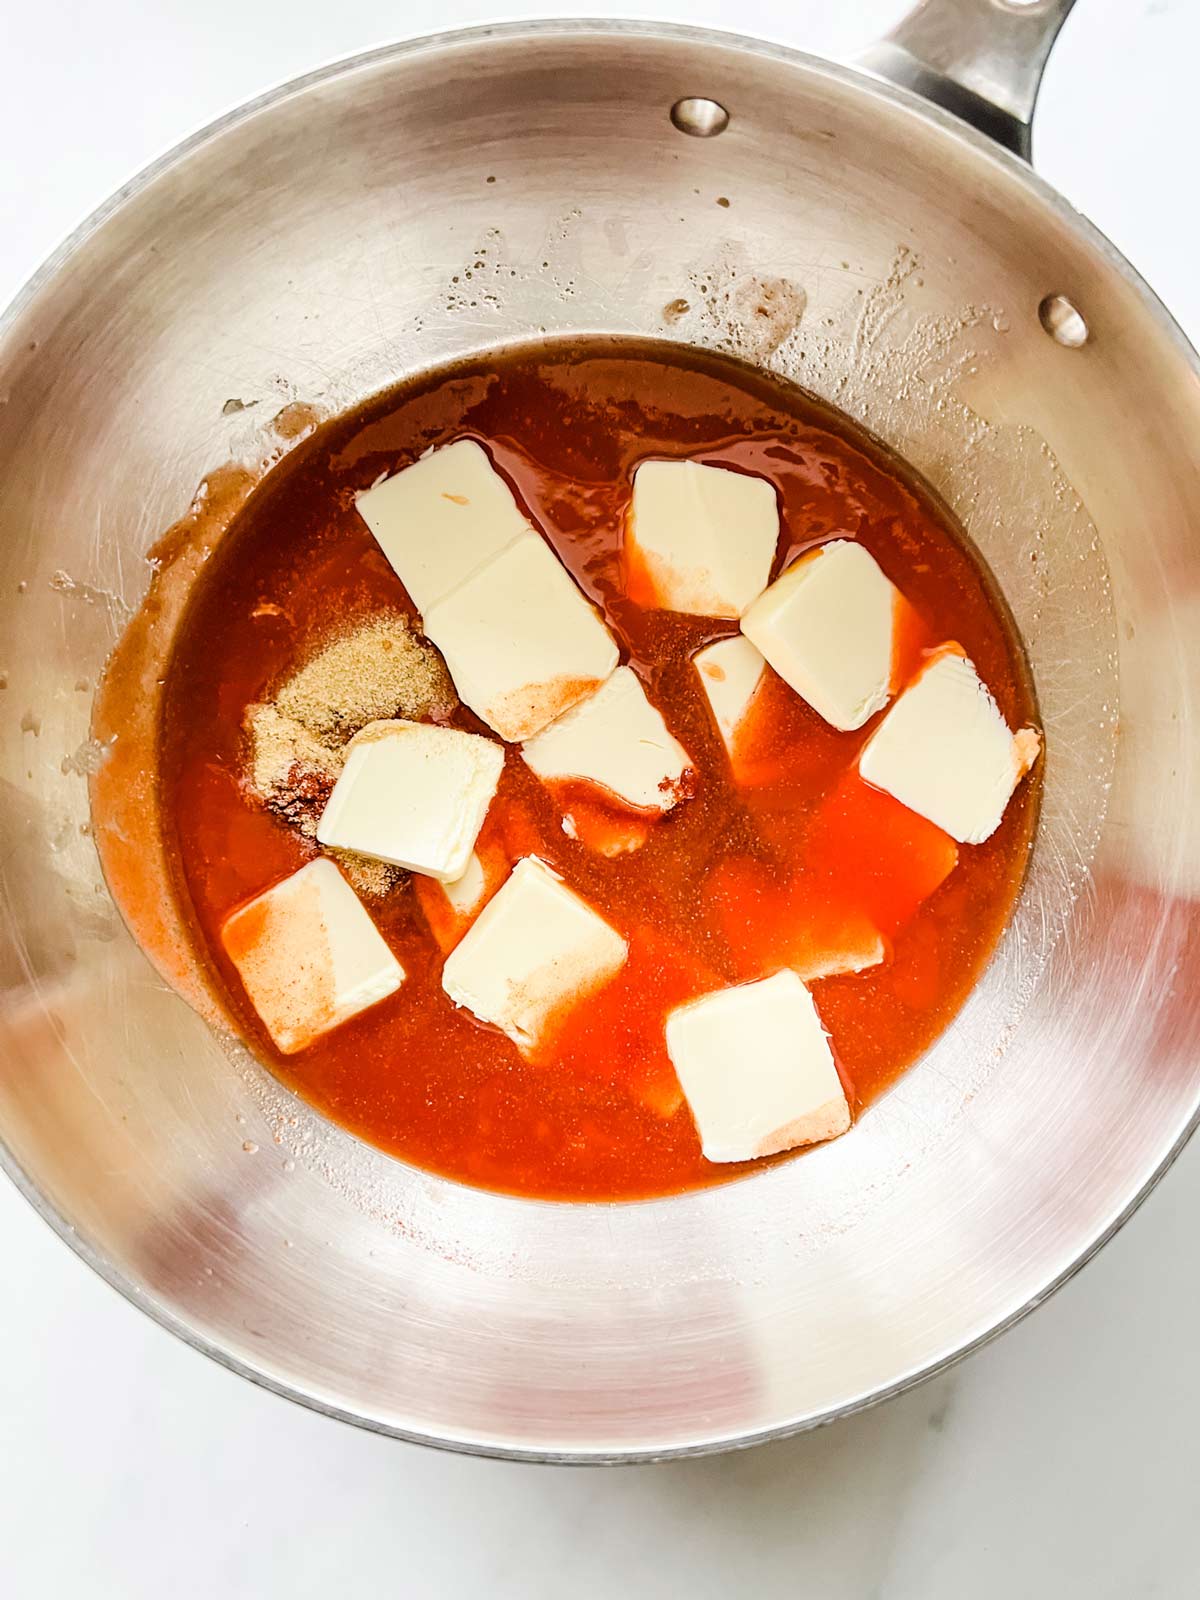 Photo of a saucepan with the ingredients for homemade buffalo sauce in it ready to be heated.